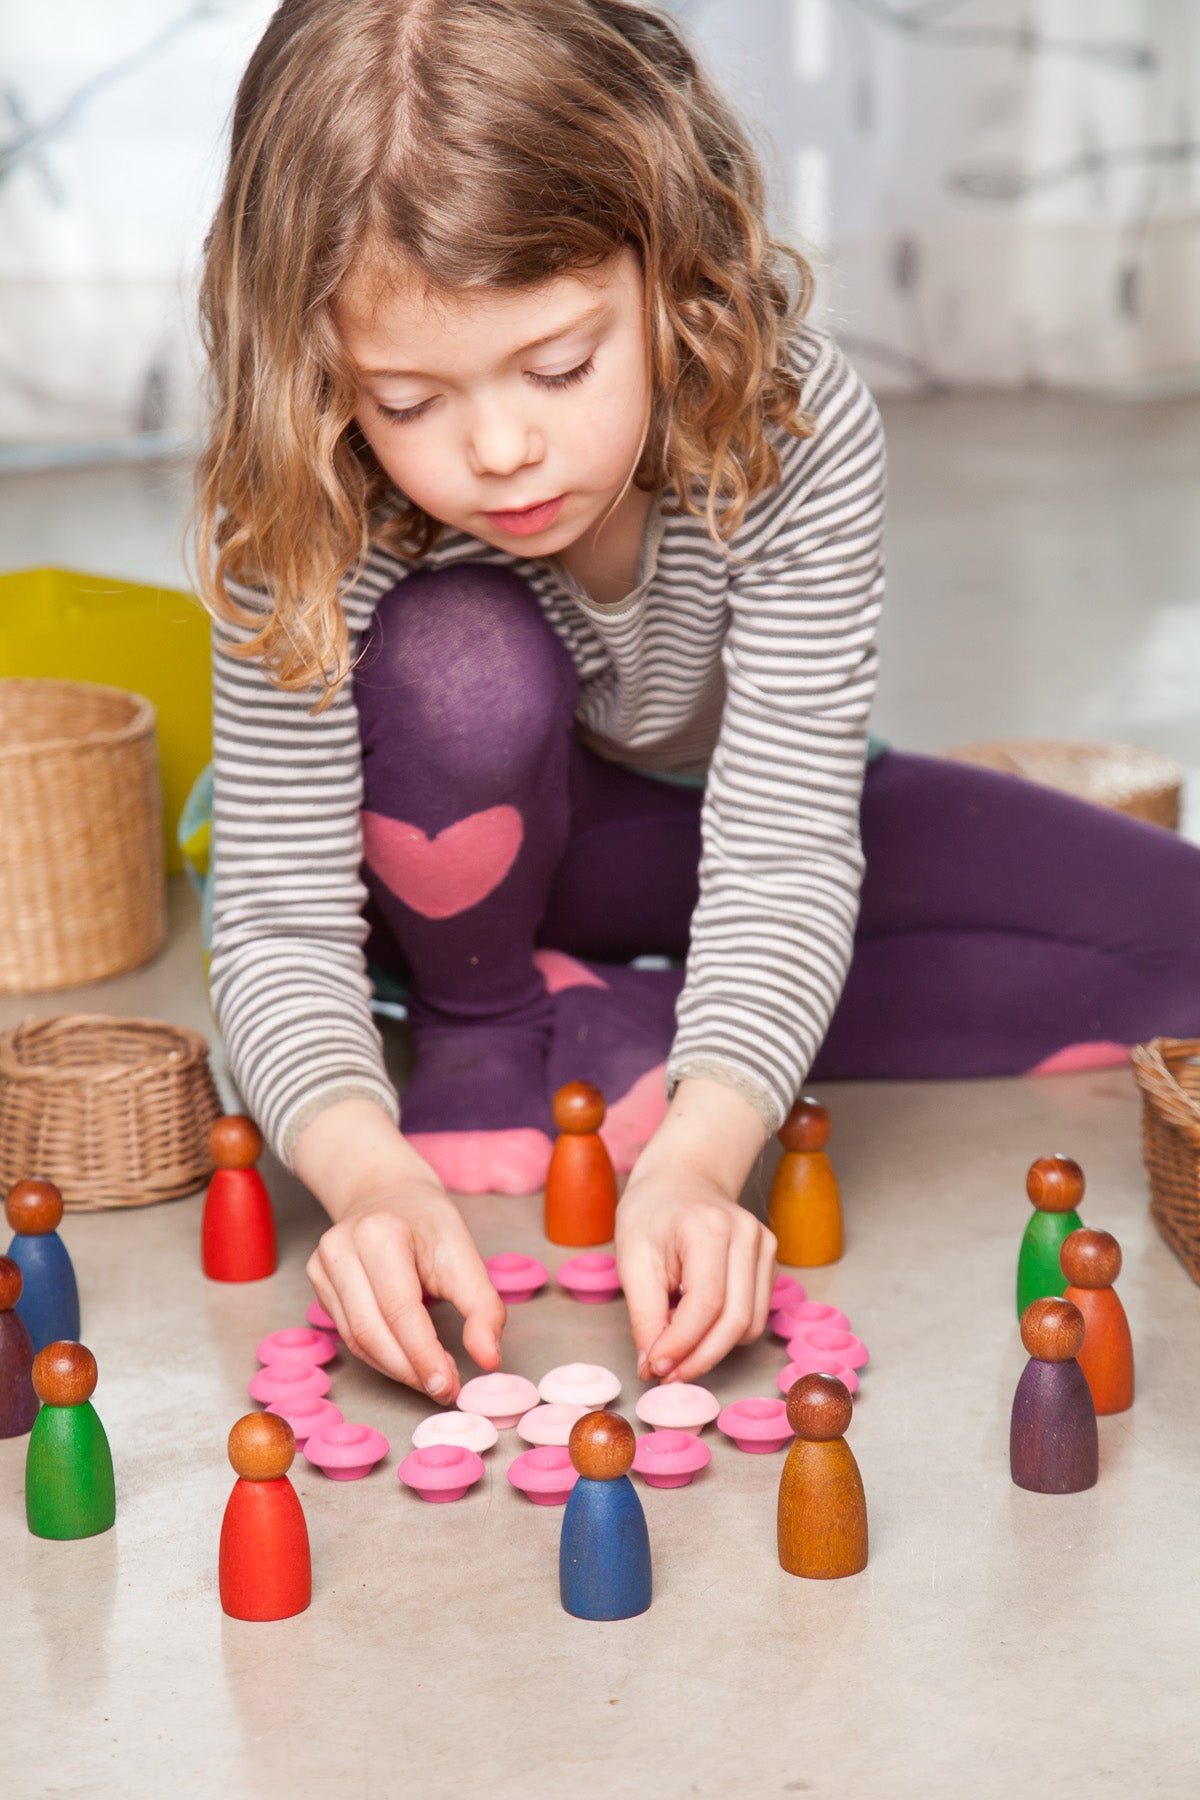 A child playing on the floor with colorful peg people, straw baskets, and a pink wooden flowers mandala.